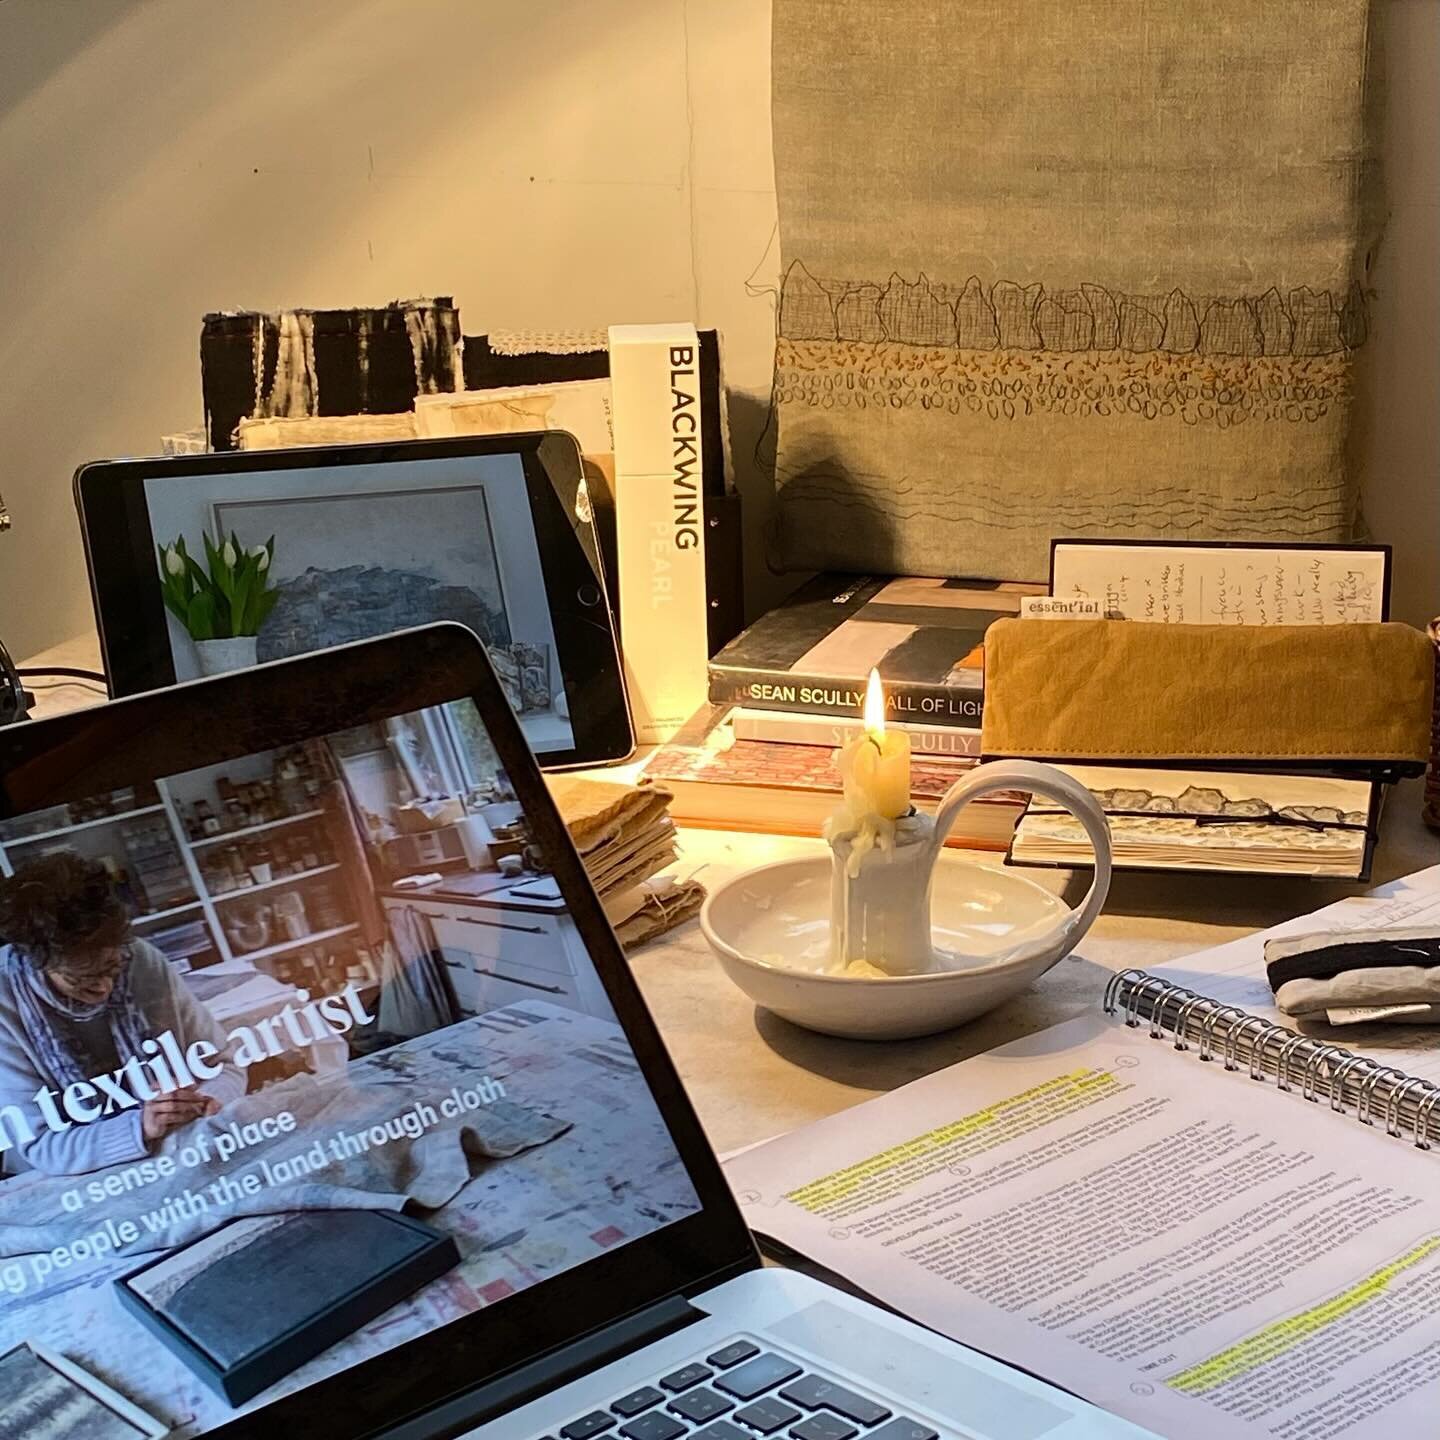 Glimpse of the cosy corner in my studio surrounded by my sketchbooks - I  love having single lit candle as a silent focal point as I sit working on the Keynote Speech for @saqaart virtual conference.  REMINDER 4 DAYS LEFT to SIGN UP Early Bird ticket